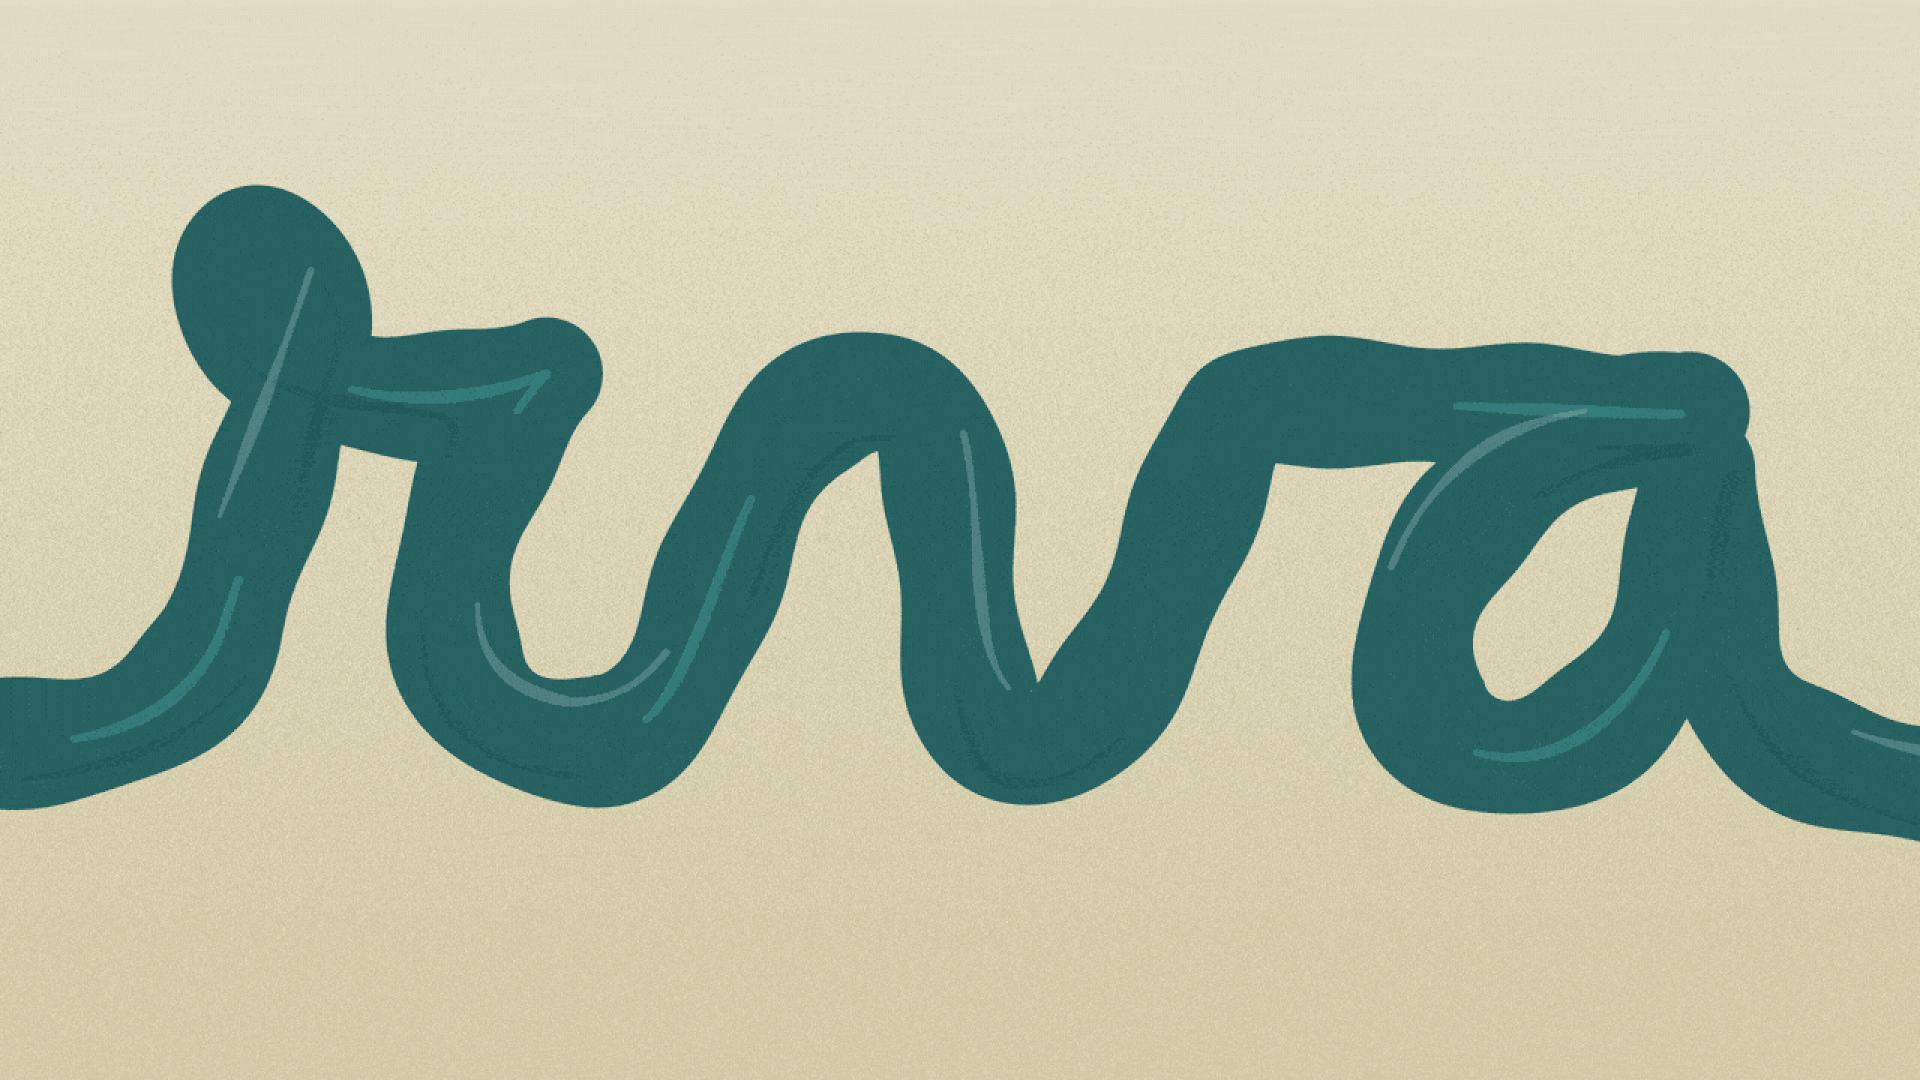 Illustration of the letters rva written in cursive and flowing like a river.